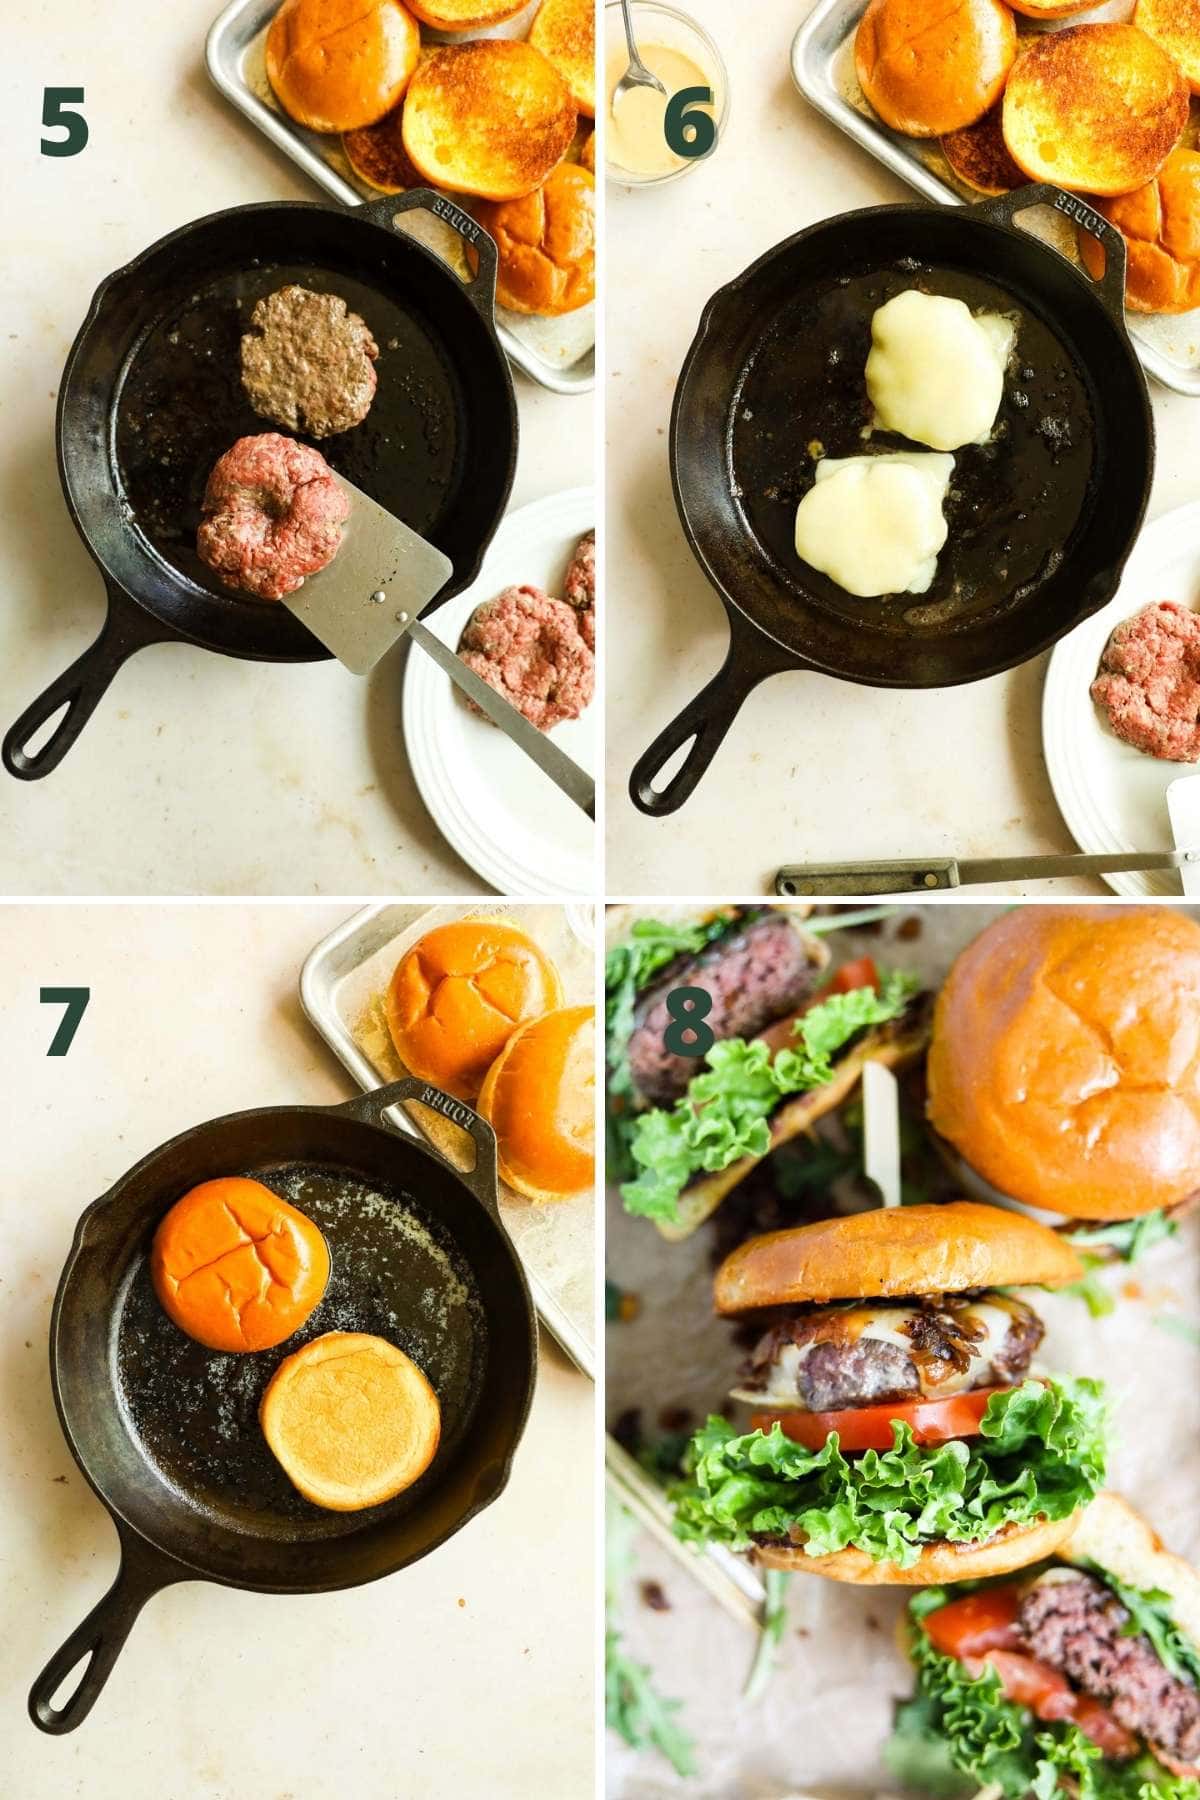 Steps to make cast iron skillet burgers, including cooking the patties in the skillet, adding cheese, toasting the buns, and assembling the burger.